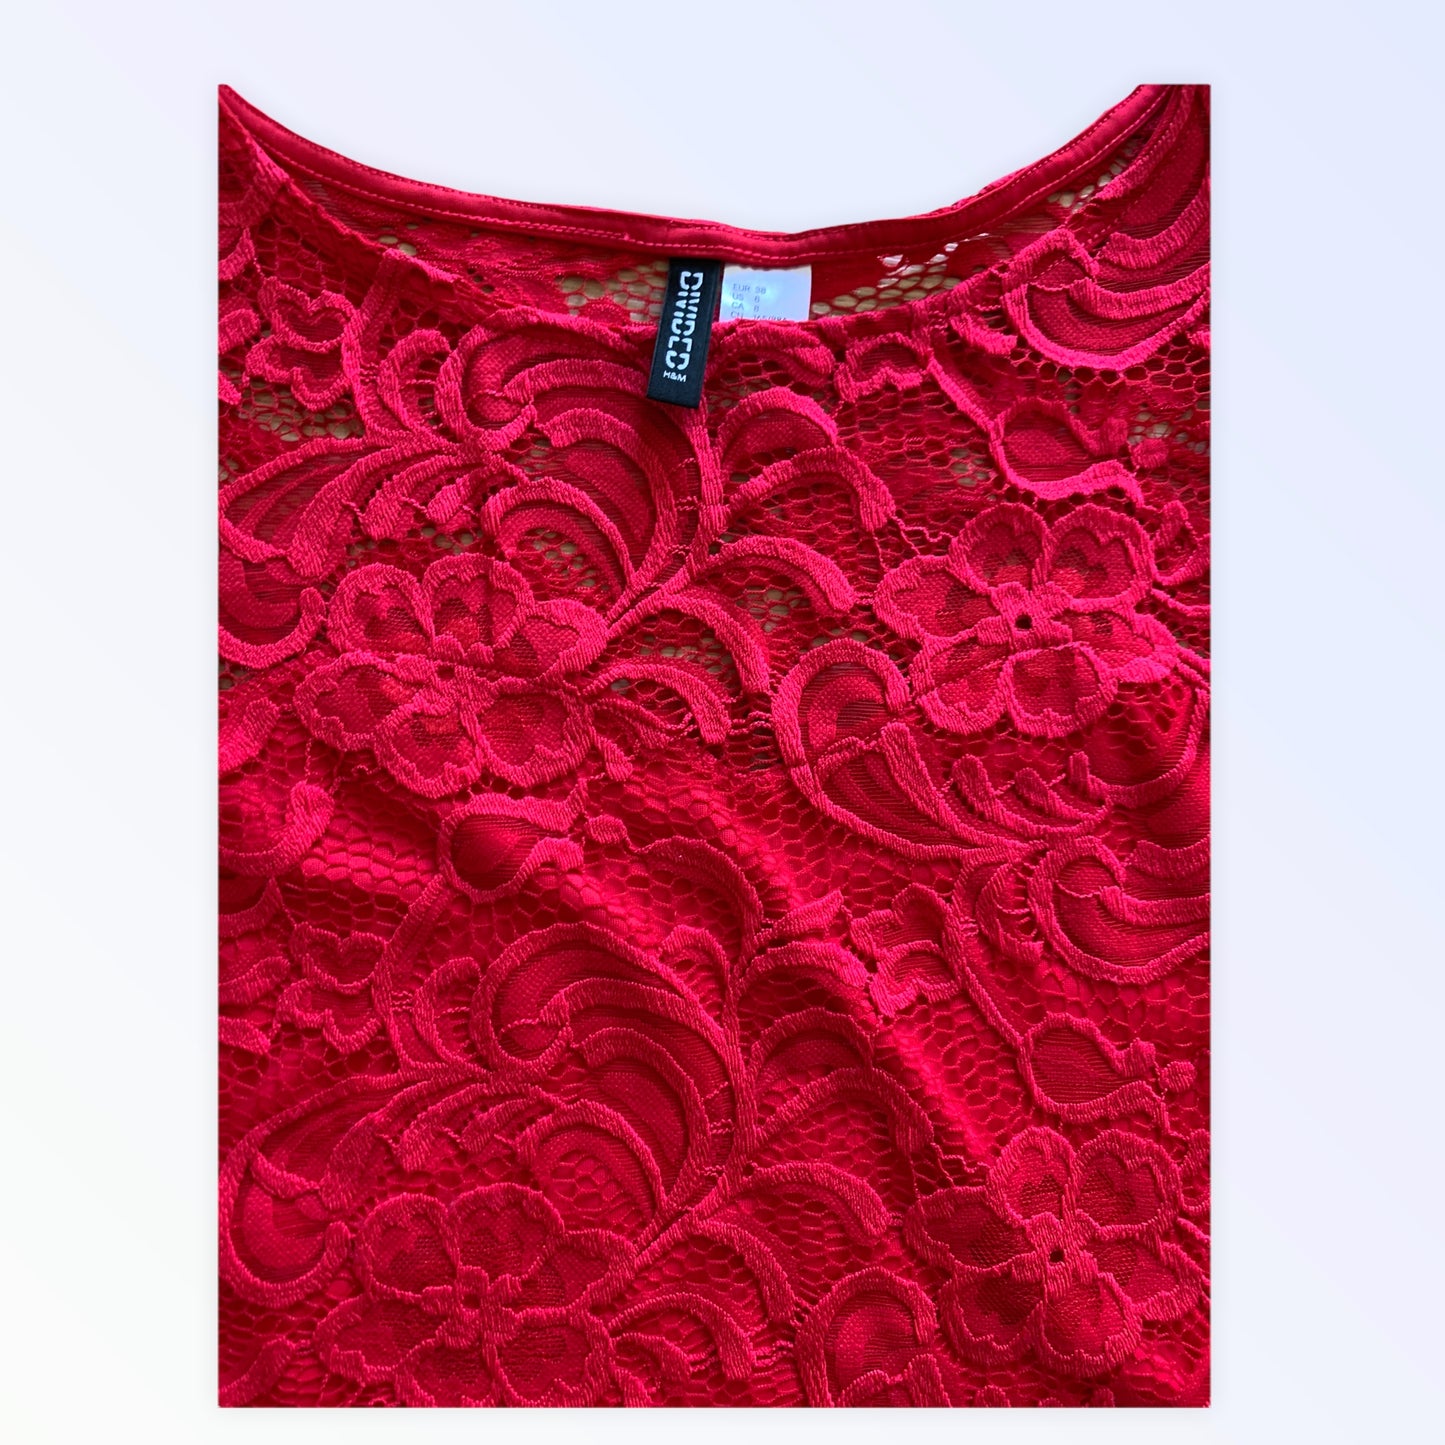 H&amp;M Divided dress women's red lace dress XS 40